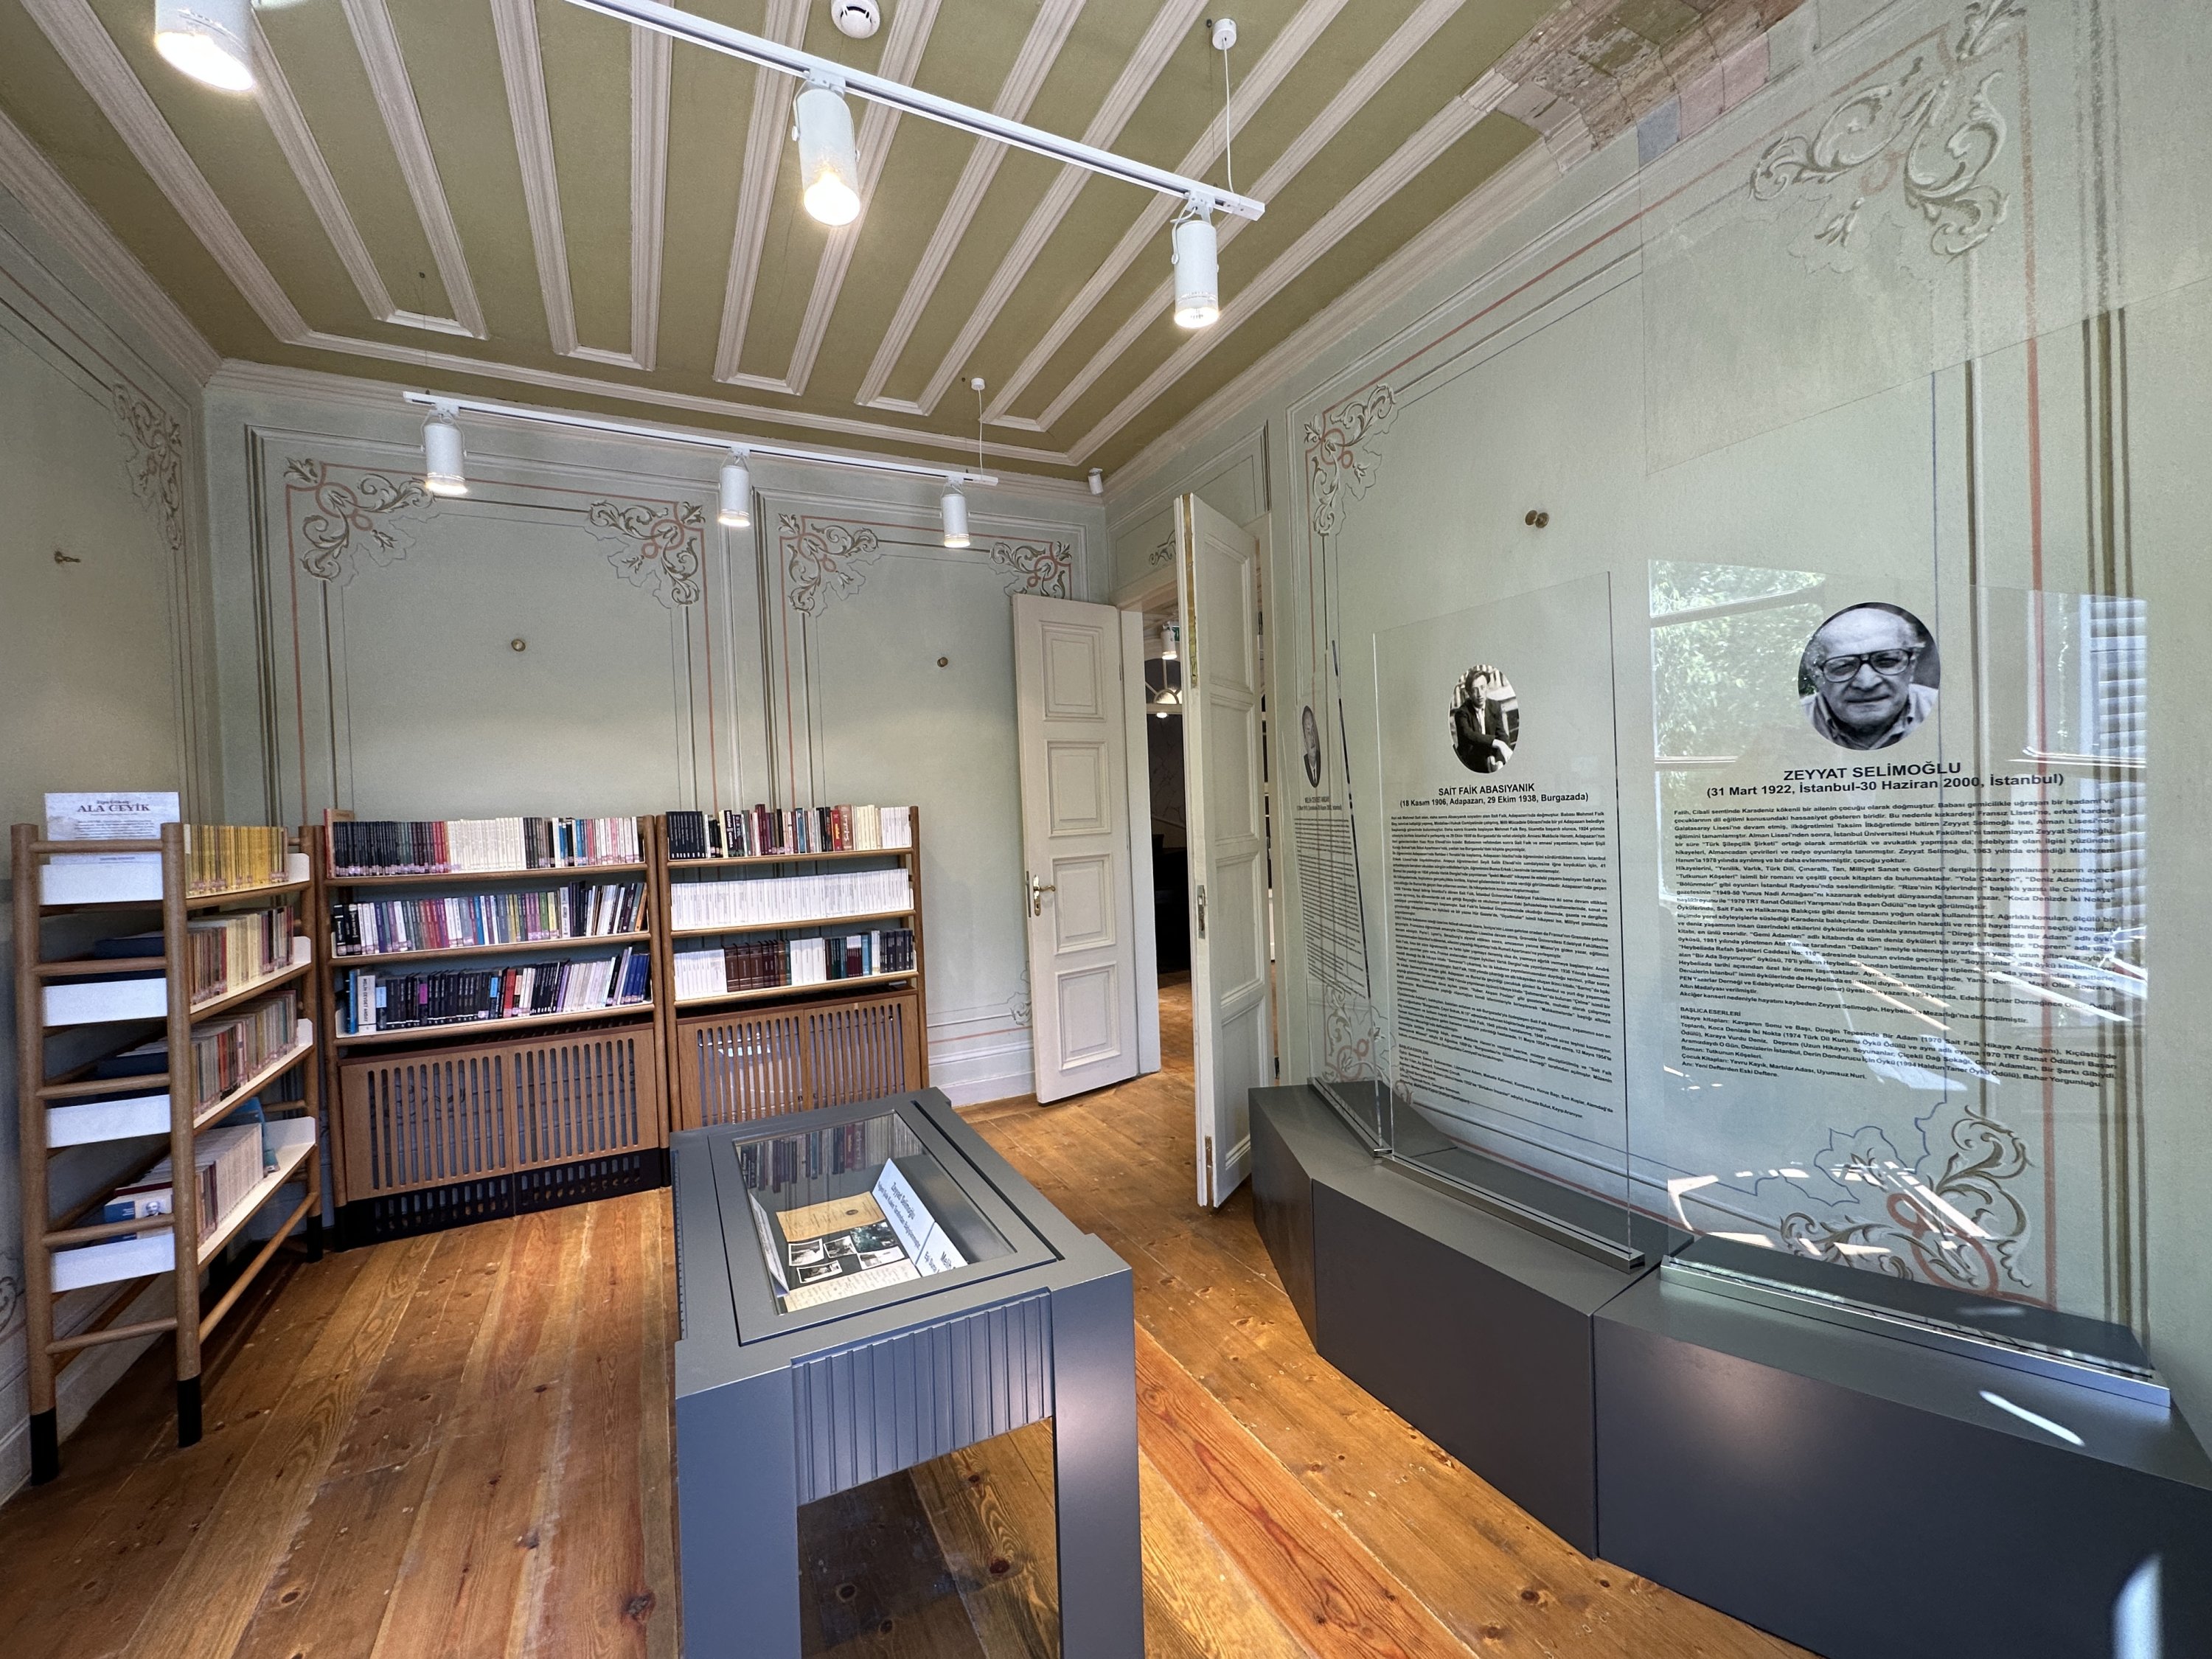 The historic Hacopoulos Mansion, located in Büyükada, has reopened as the "Istanbul Büyükada Literature Museum Library" after restoration, Princes' Island, Türkiye, May 2, 2023. (AA Photo)